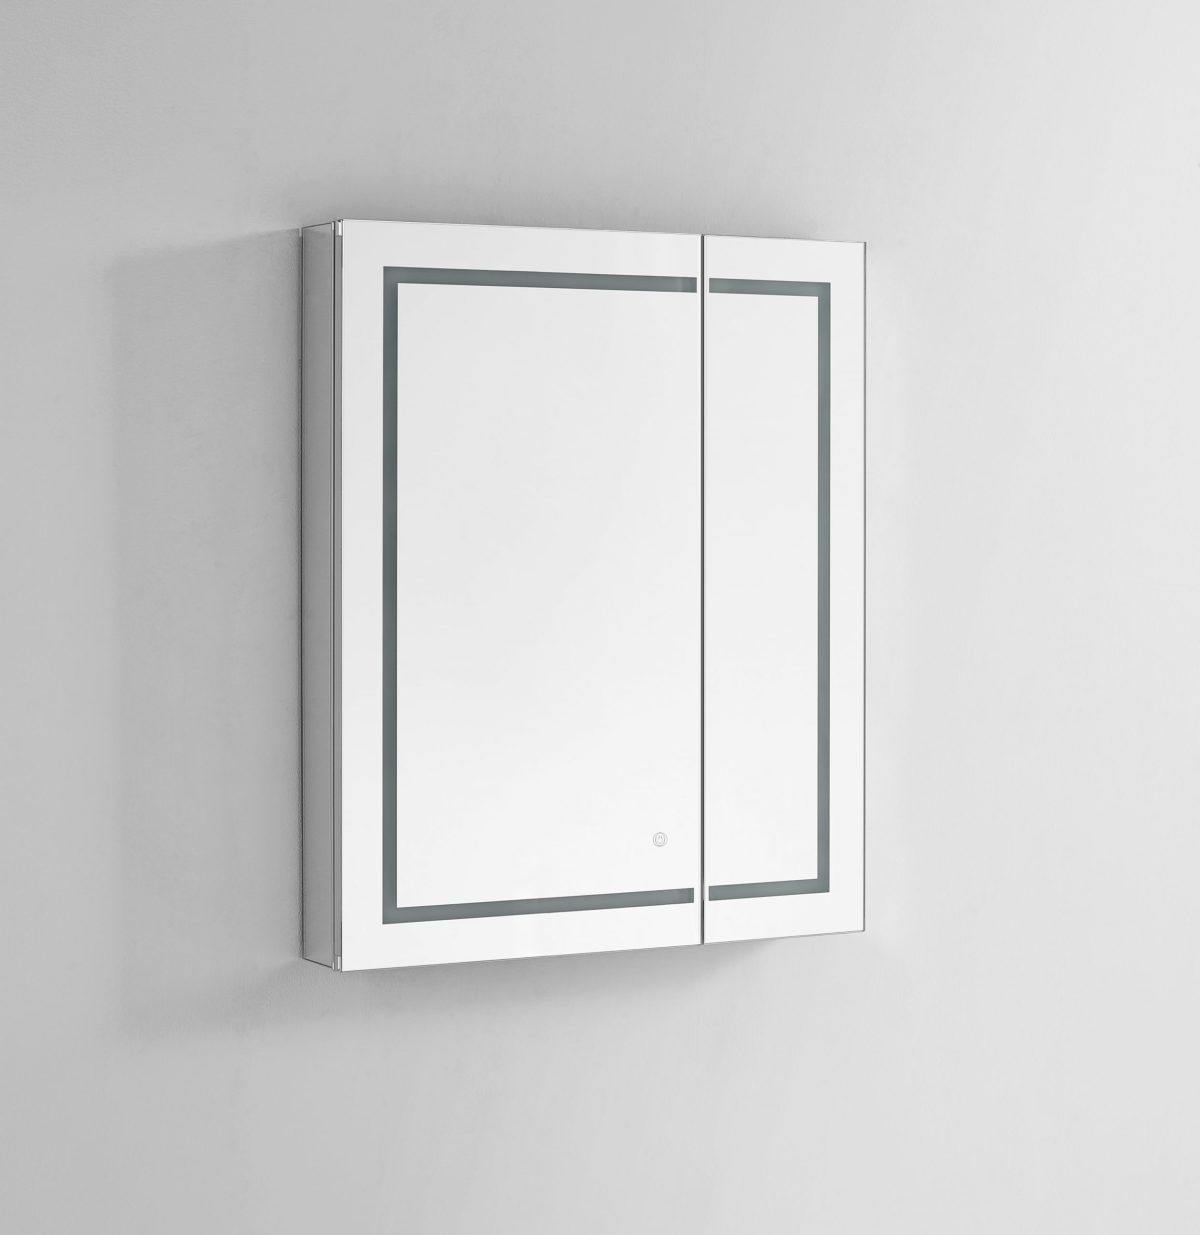 AQUADOM Royale Plus 30 inches x 36 inches LED Lighted Mirror Glass Medicine Cabinet for Bathroom